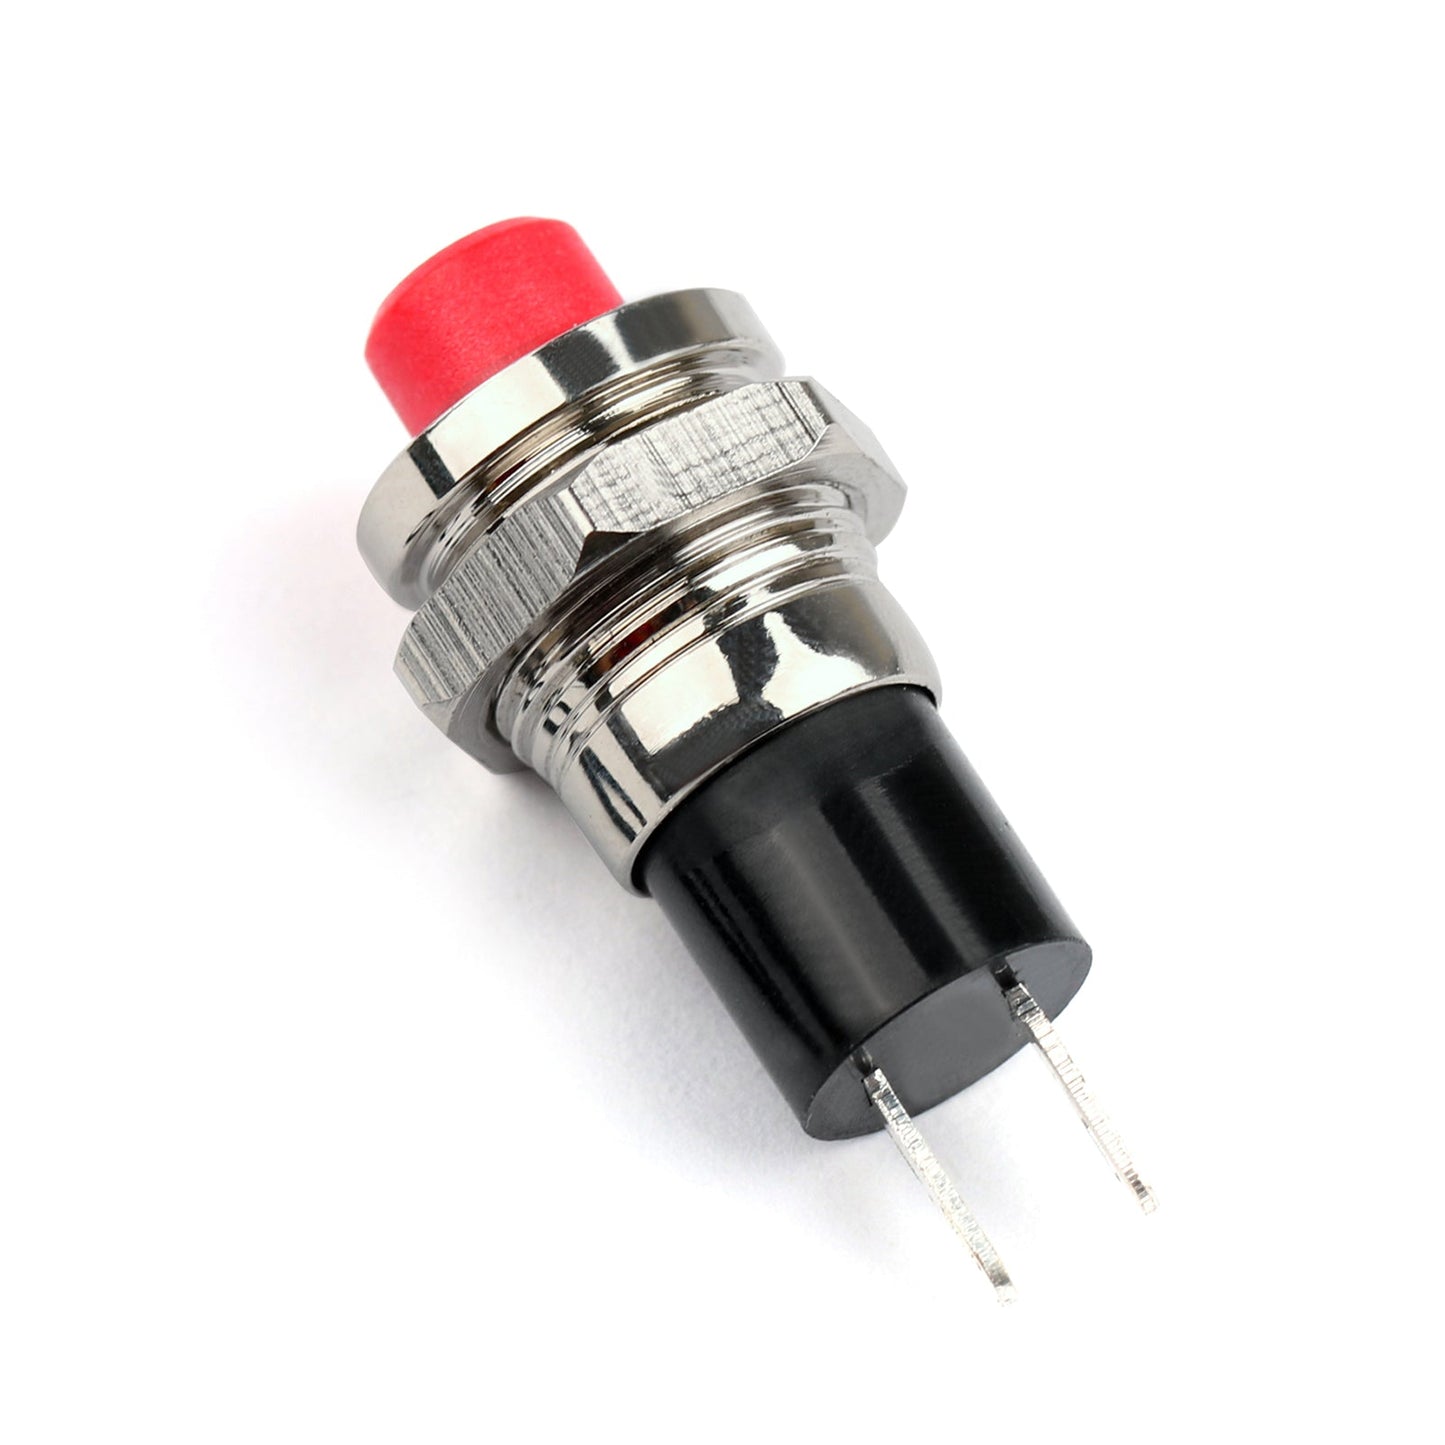 New Mini Push Button SPST Momentary N/O OFF-ON Switch 10mm R/B For Car/Boat